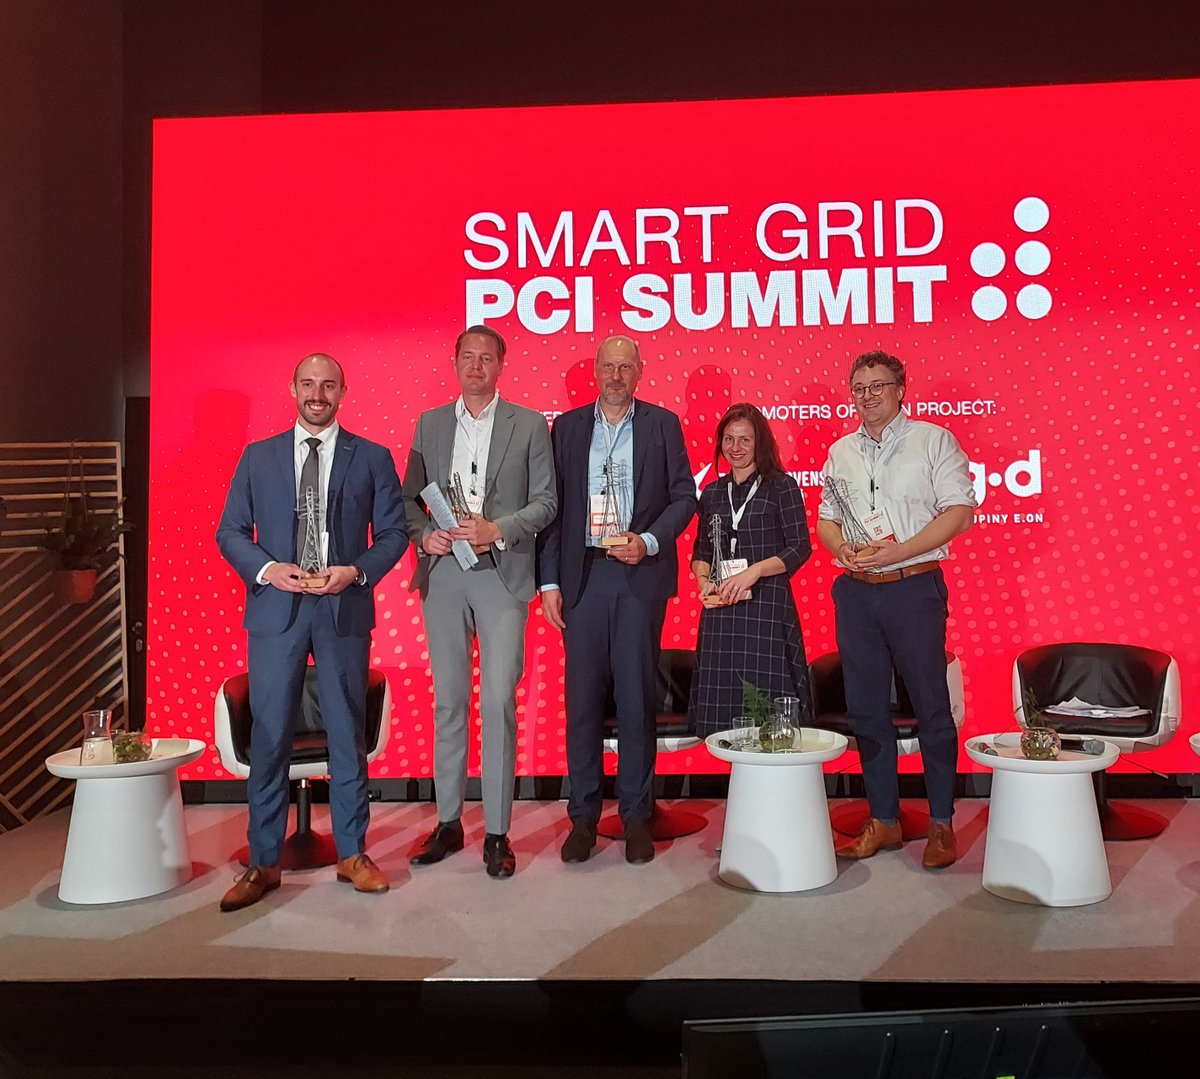 Our Expert Coordinator Stephan Gross joined the debate on @AconSk's #SmartGrids project during the first edition of the PCI - European Energy Summit in #Bratislava.

#PCI #gridreliability #gridconnection #FutureGridsEU #Summit #digitalisation